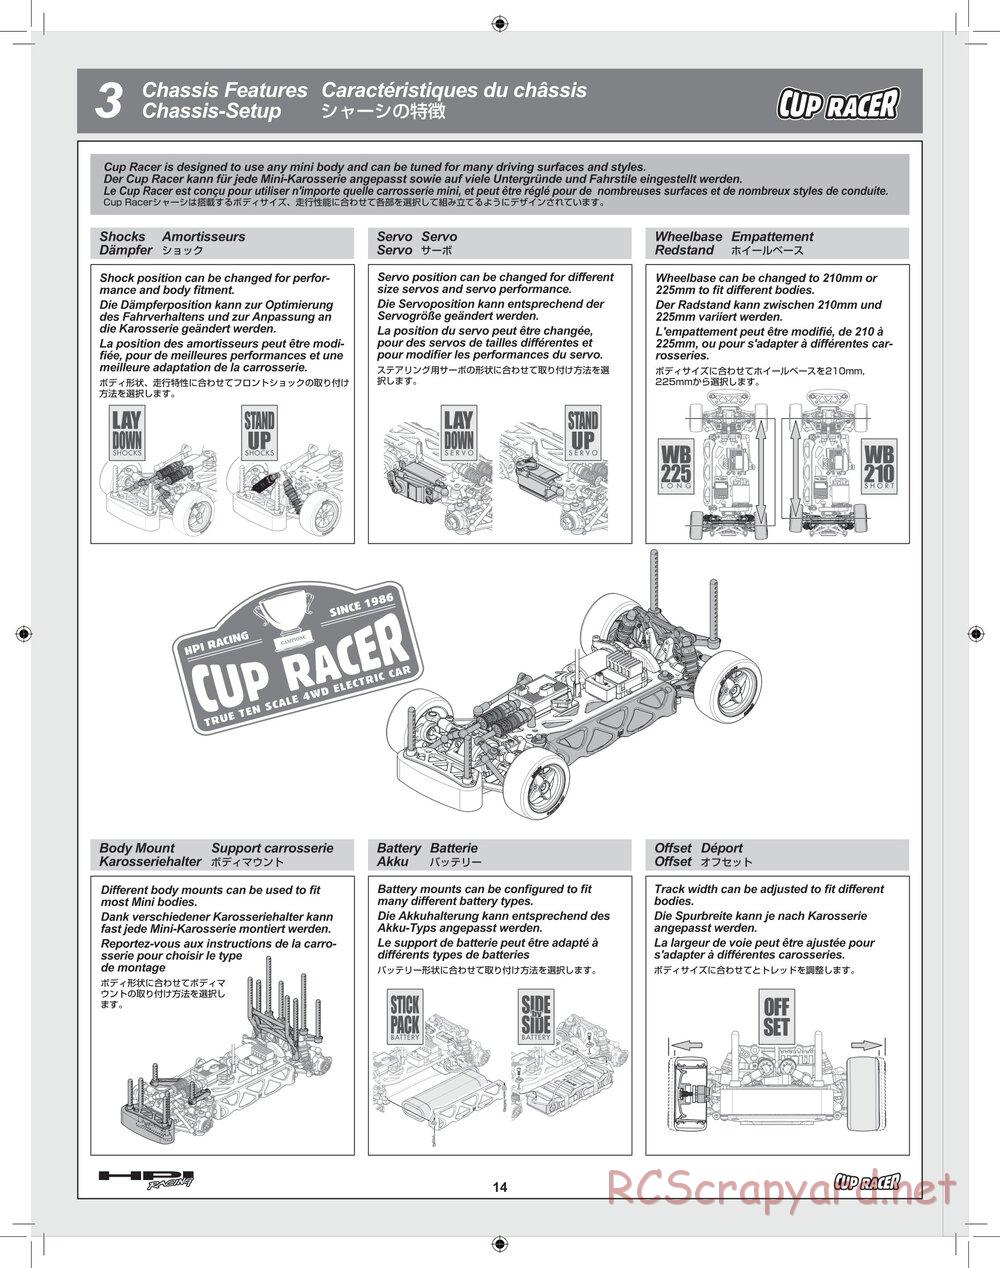 HPI - Cup Racer - Manual - Page 14